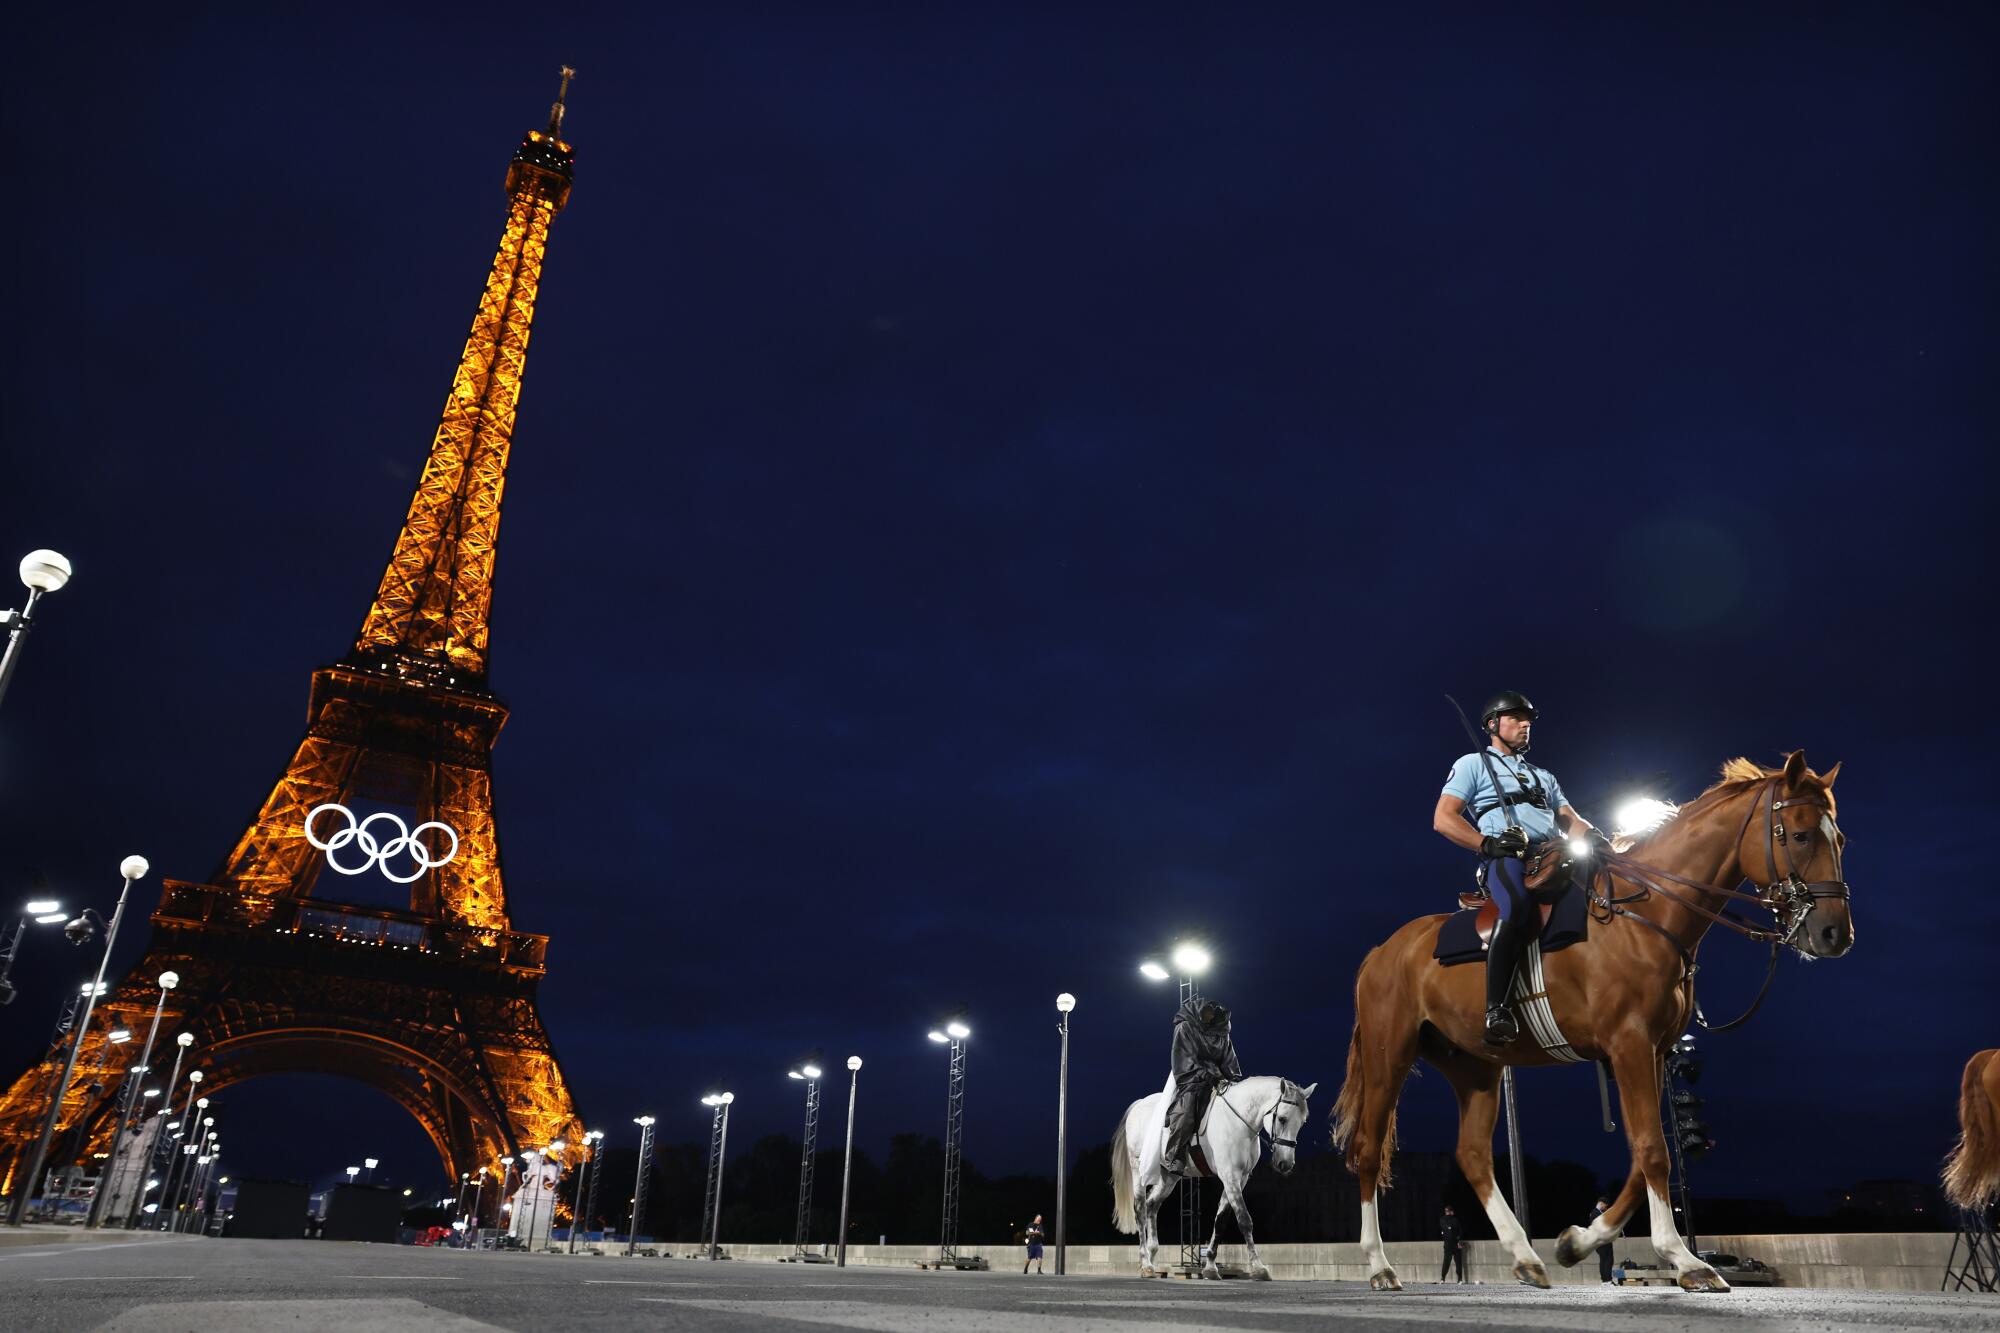 Mounted police officers ride near the Eiffel Tower at night.